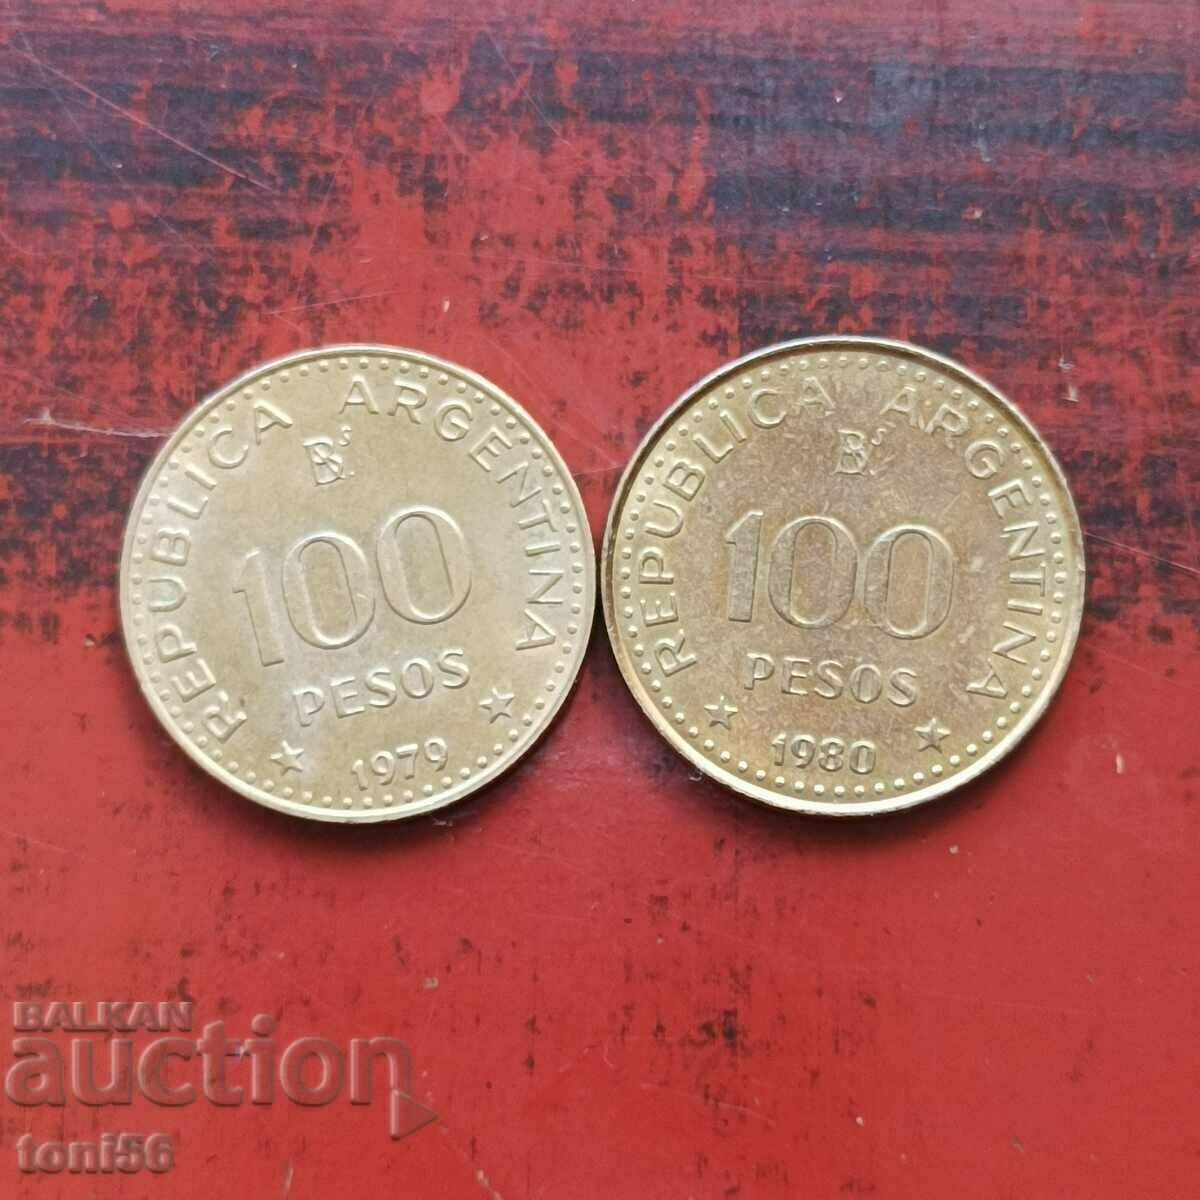 Argentina 2x100 pesos 1979-80 UNC - from collection